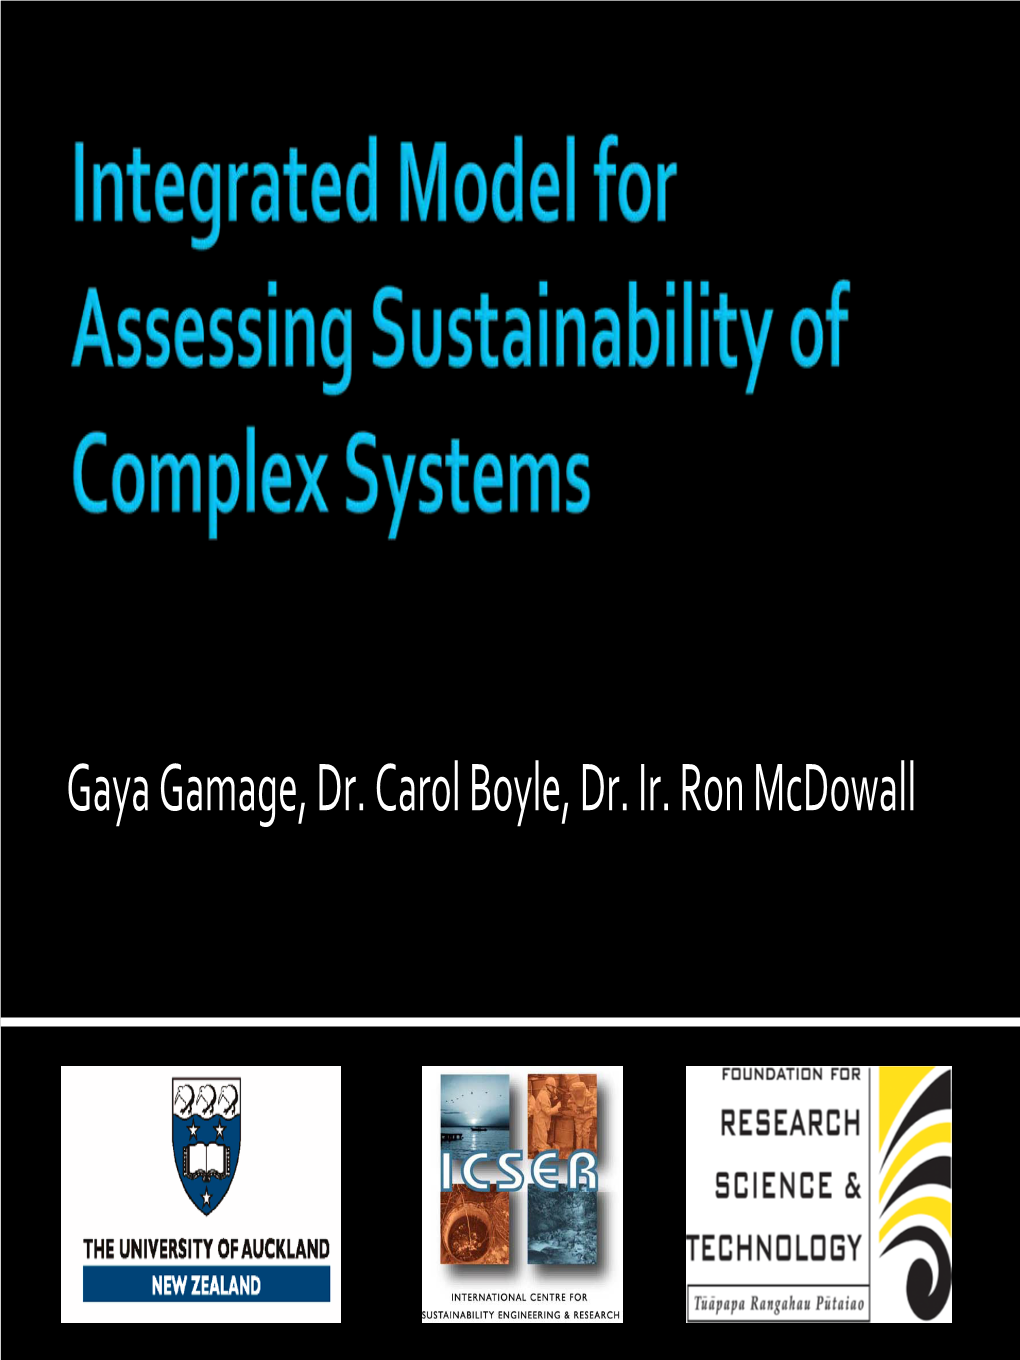 Integrated Model for Assessing Sustainability of Complex Systems